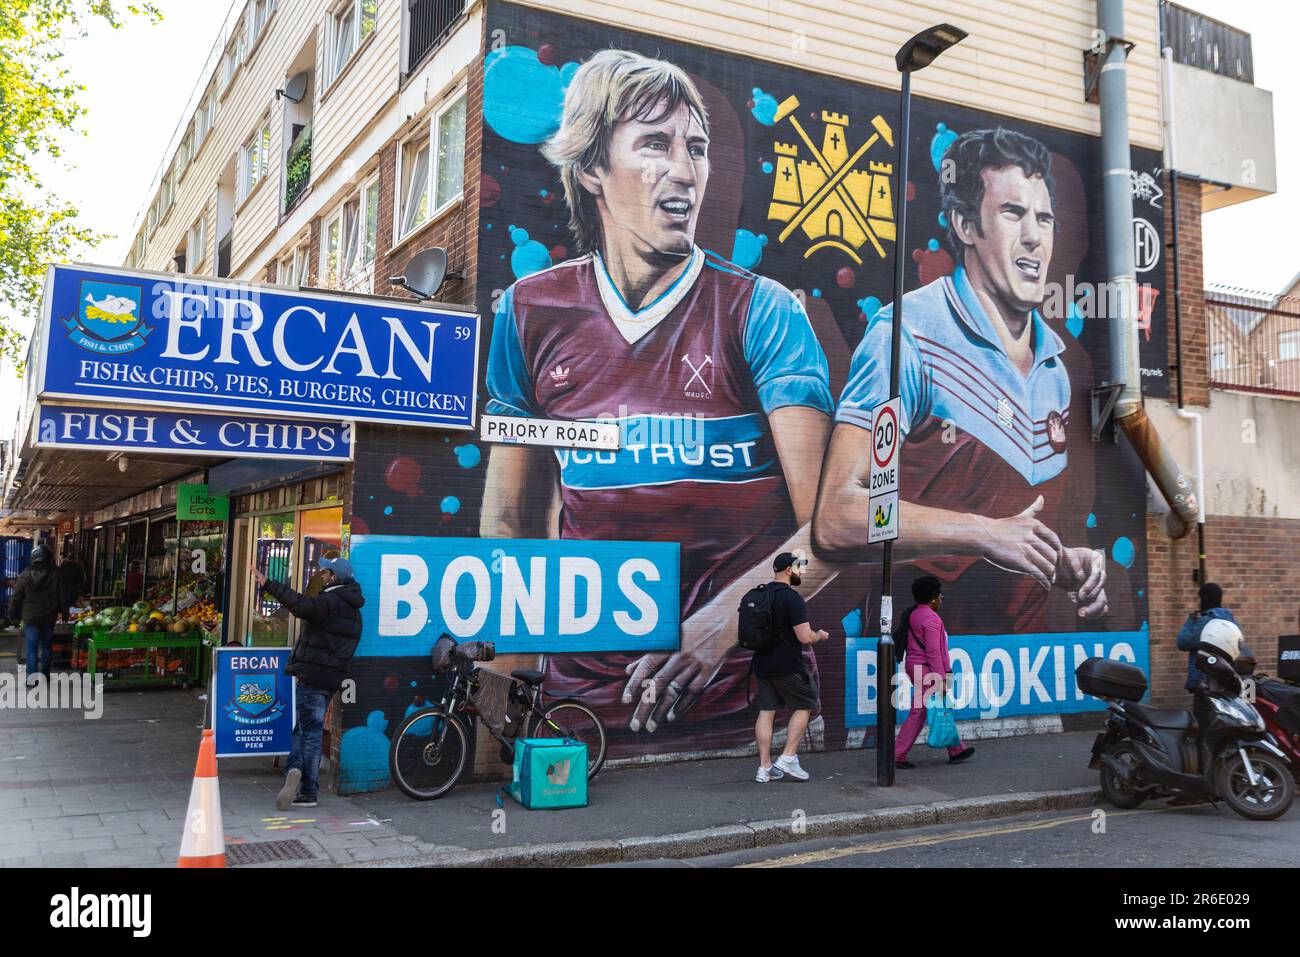 Large mural street art painting of Billy Bonds and Trevor Brooking in Newham near the old West Ham Utd football ground Upton Park Stock Photo